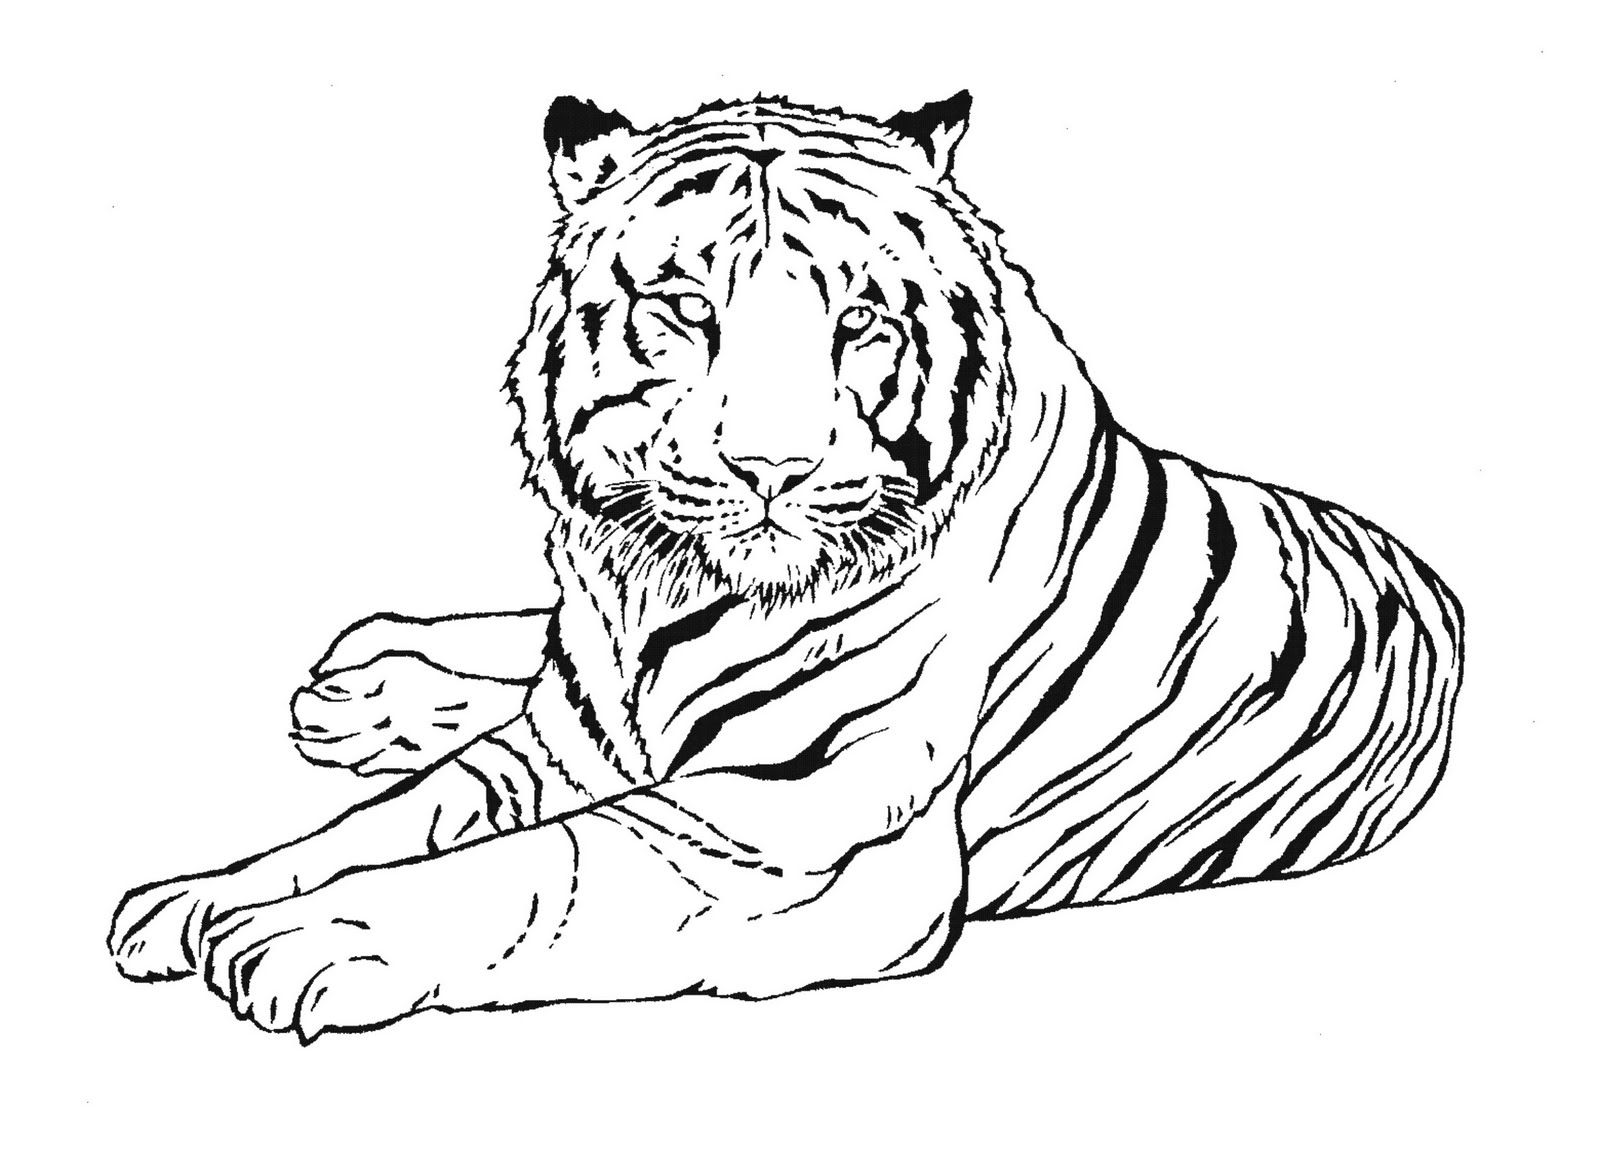 Printable tiger pictures to color colorful animal paintings animal coloring pages tiger art